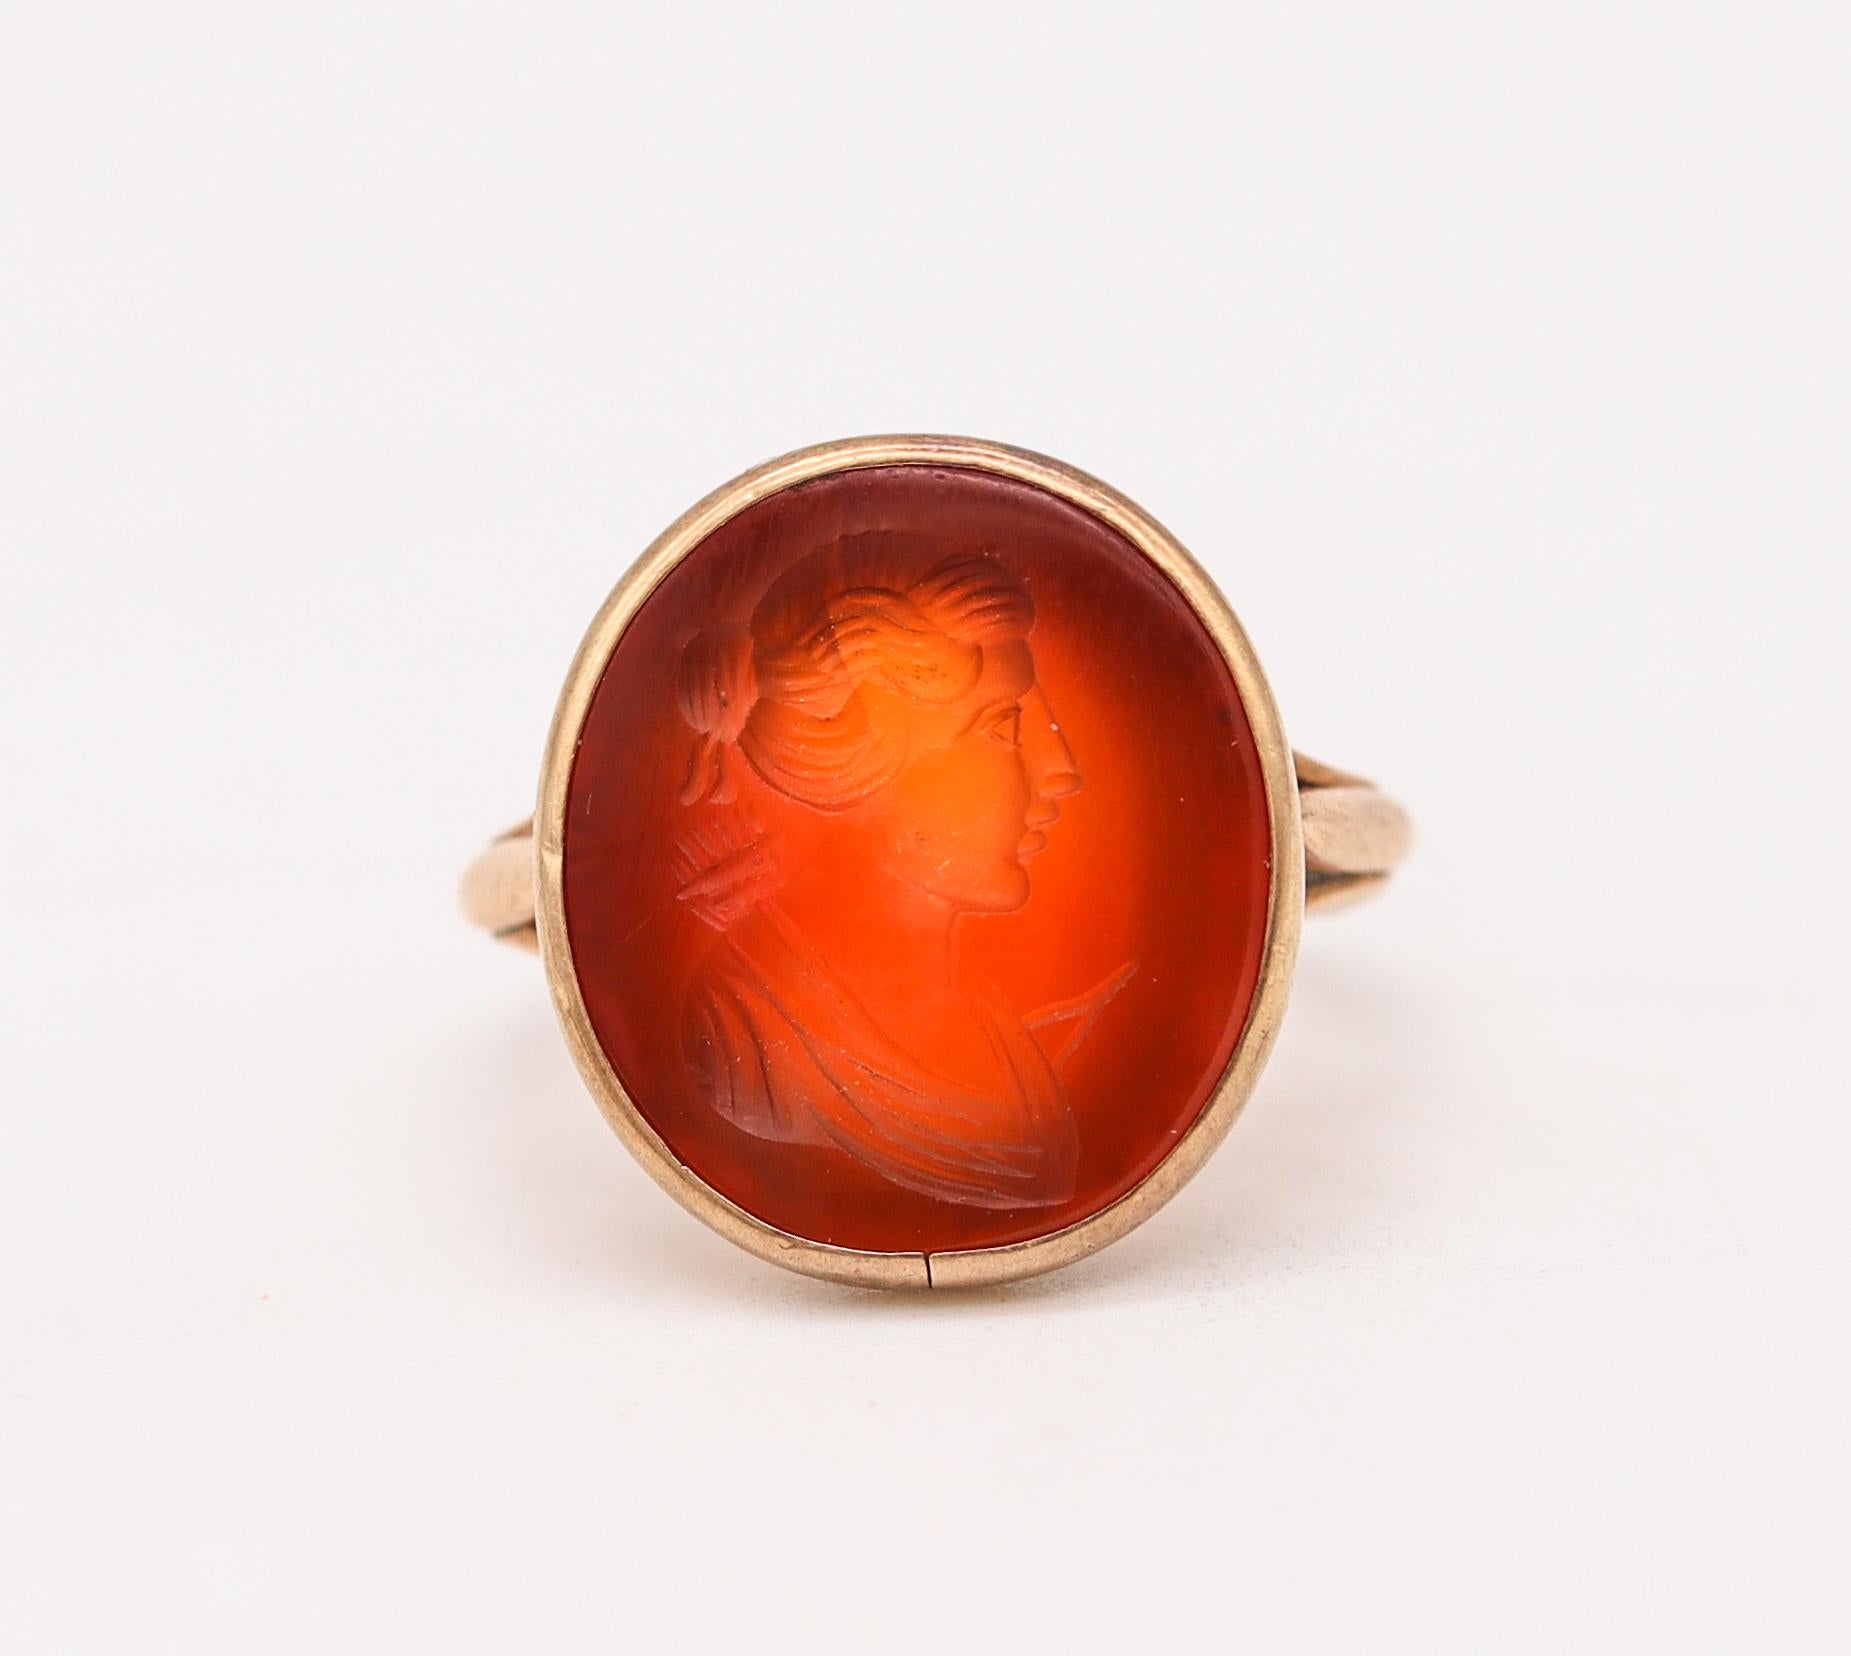 Portrait Cut Victorian 1890 Signet Intaglio Ring in 18kt Yellow Gold with Carved Carnelian